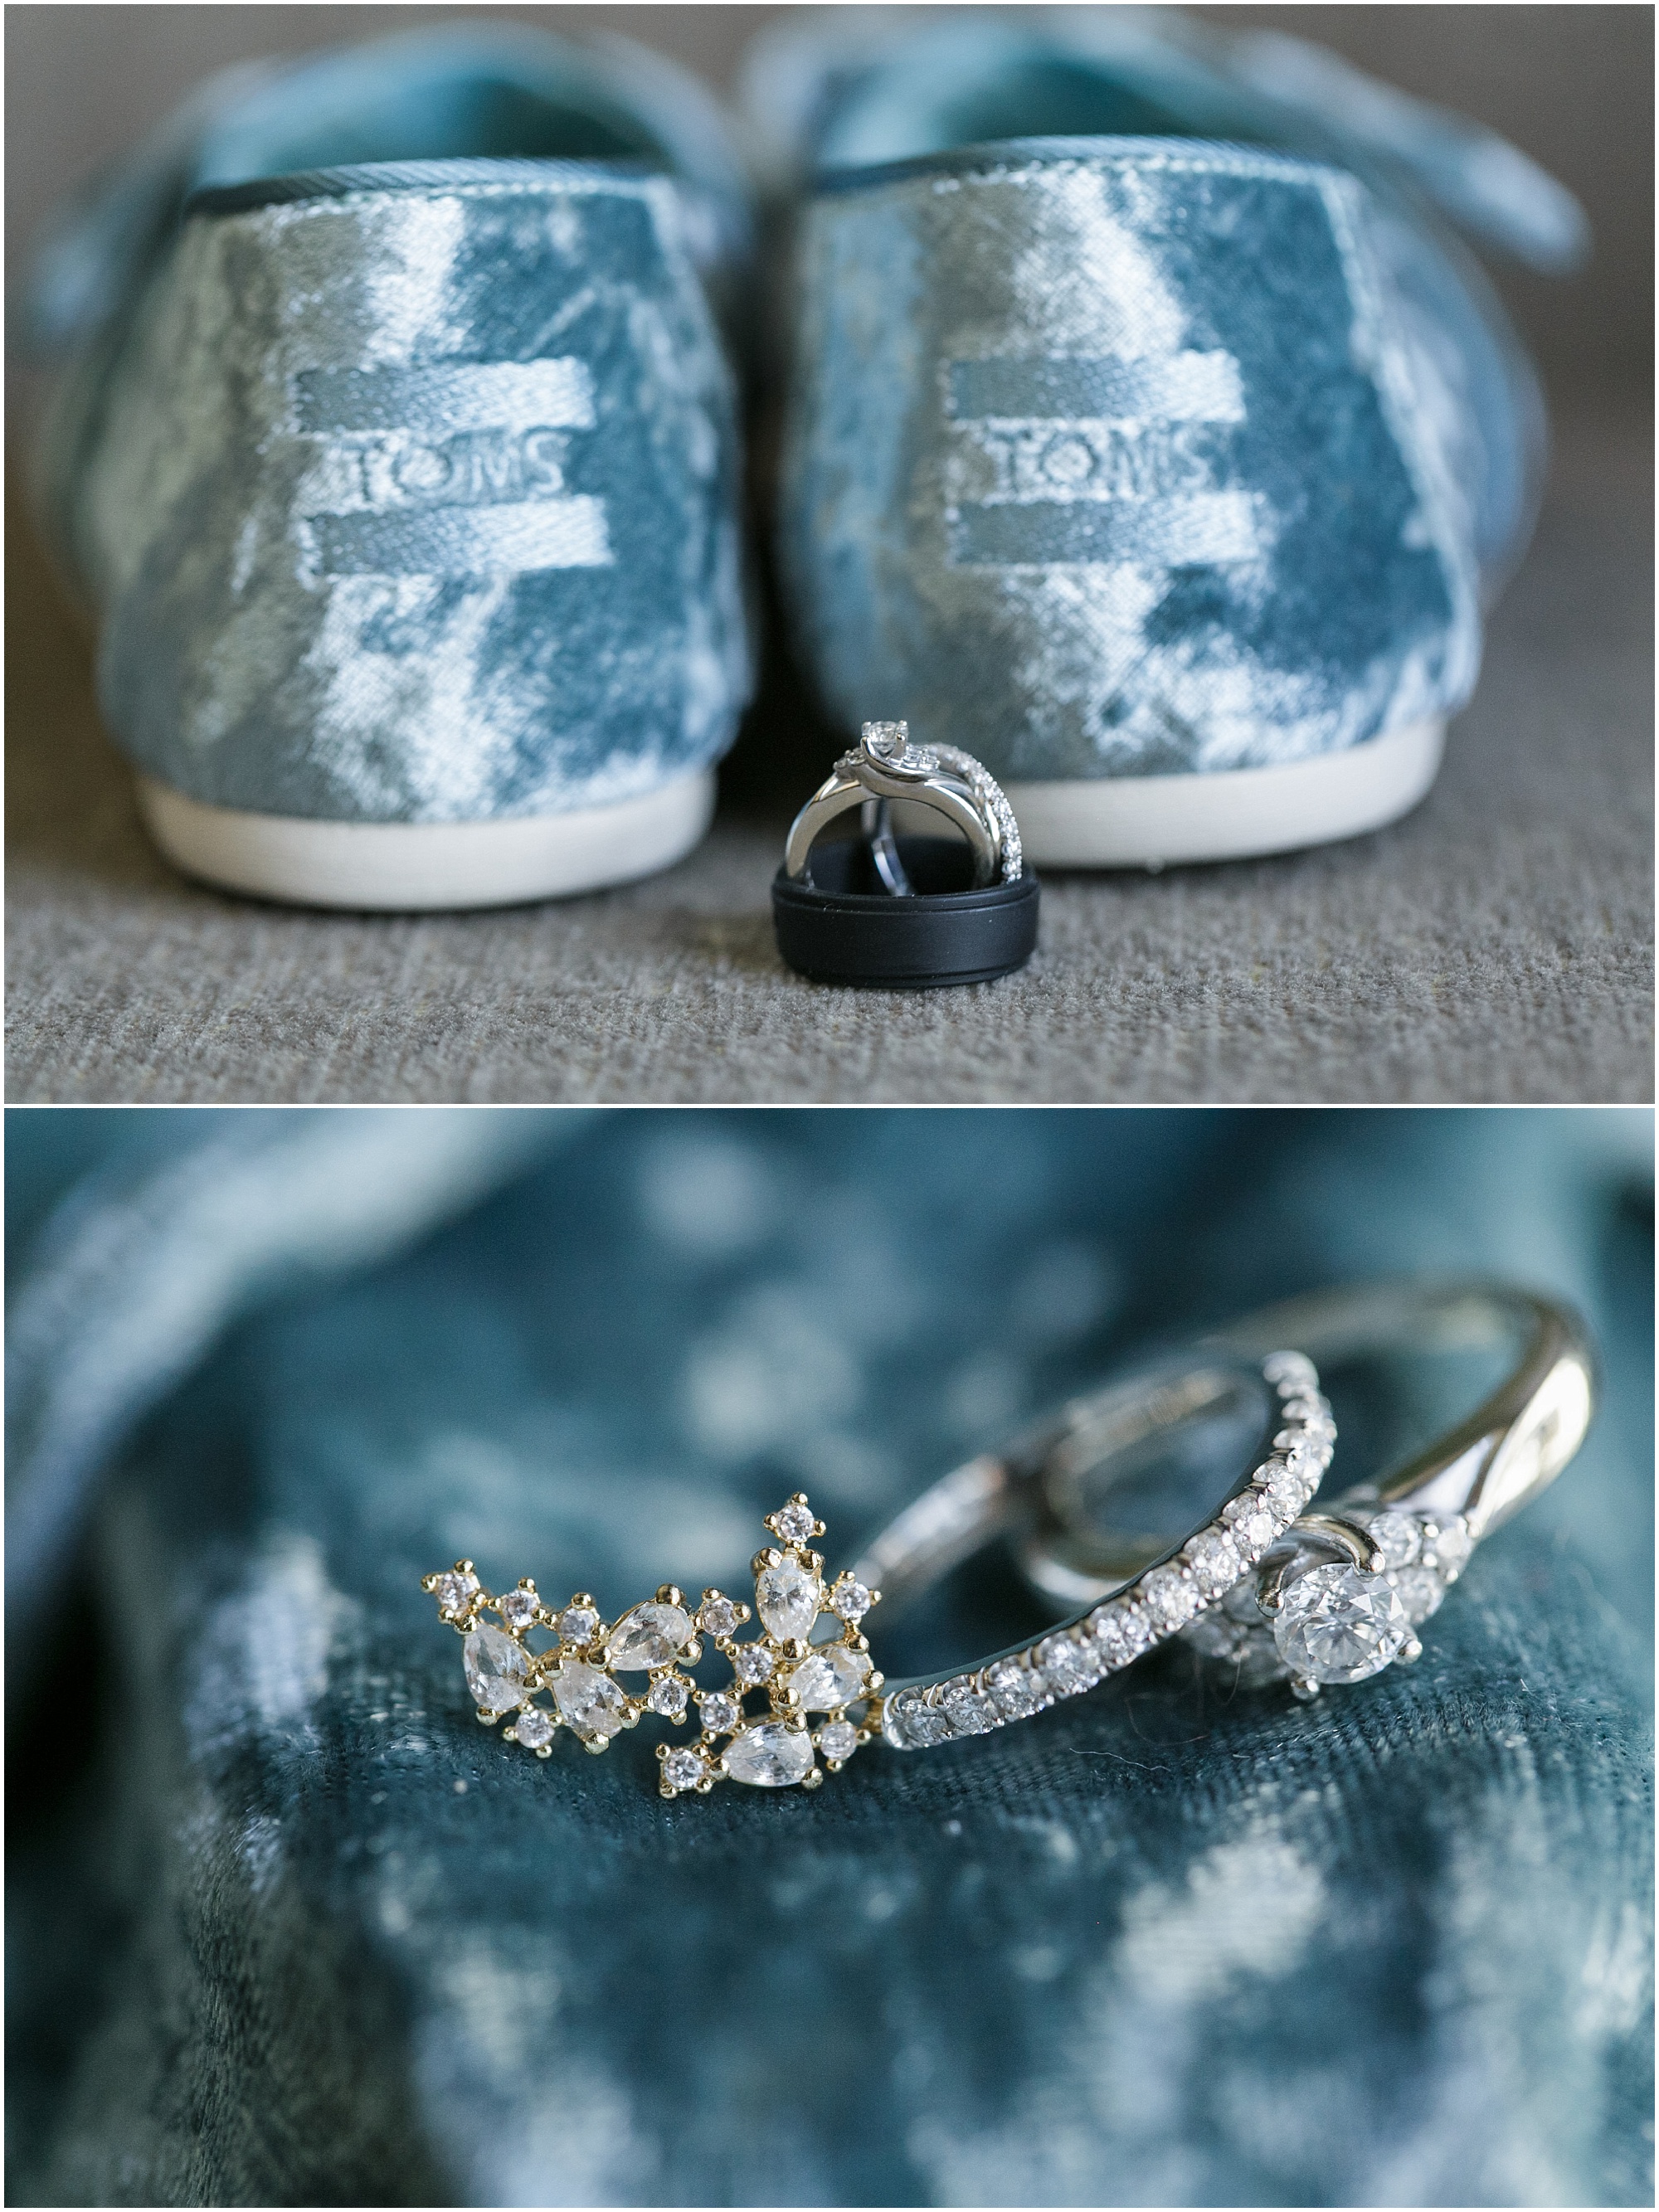 Wedding rings and blue crushed velvet shoes. 